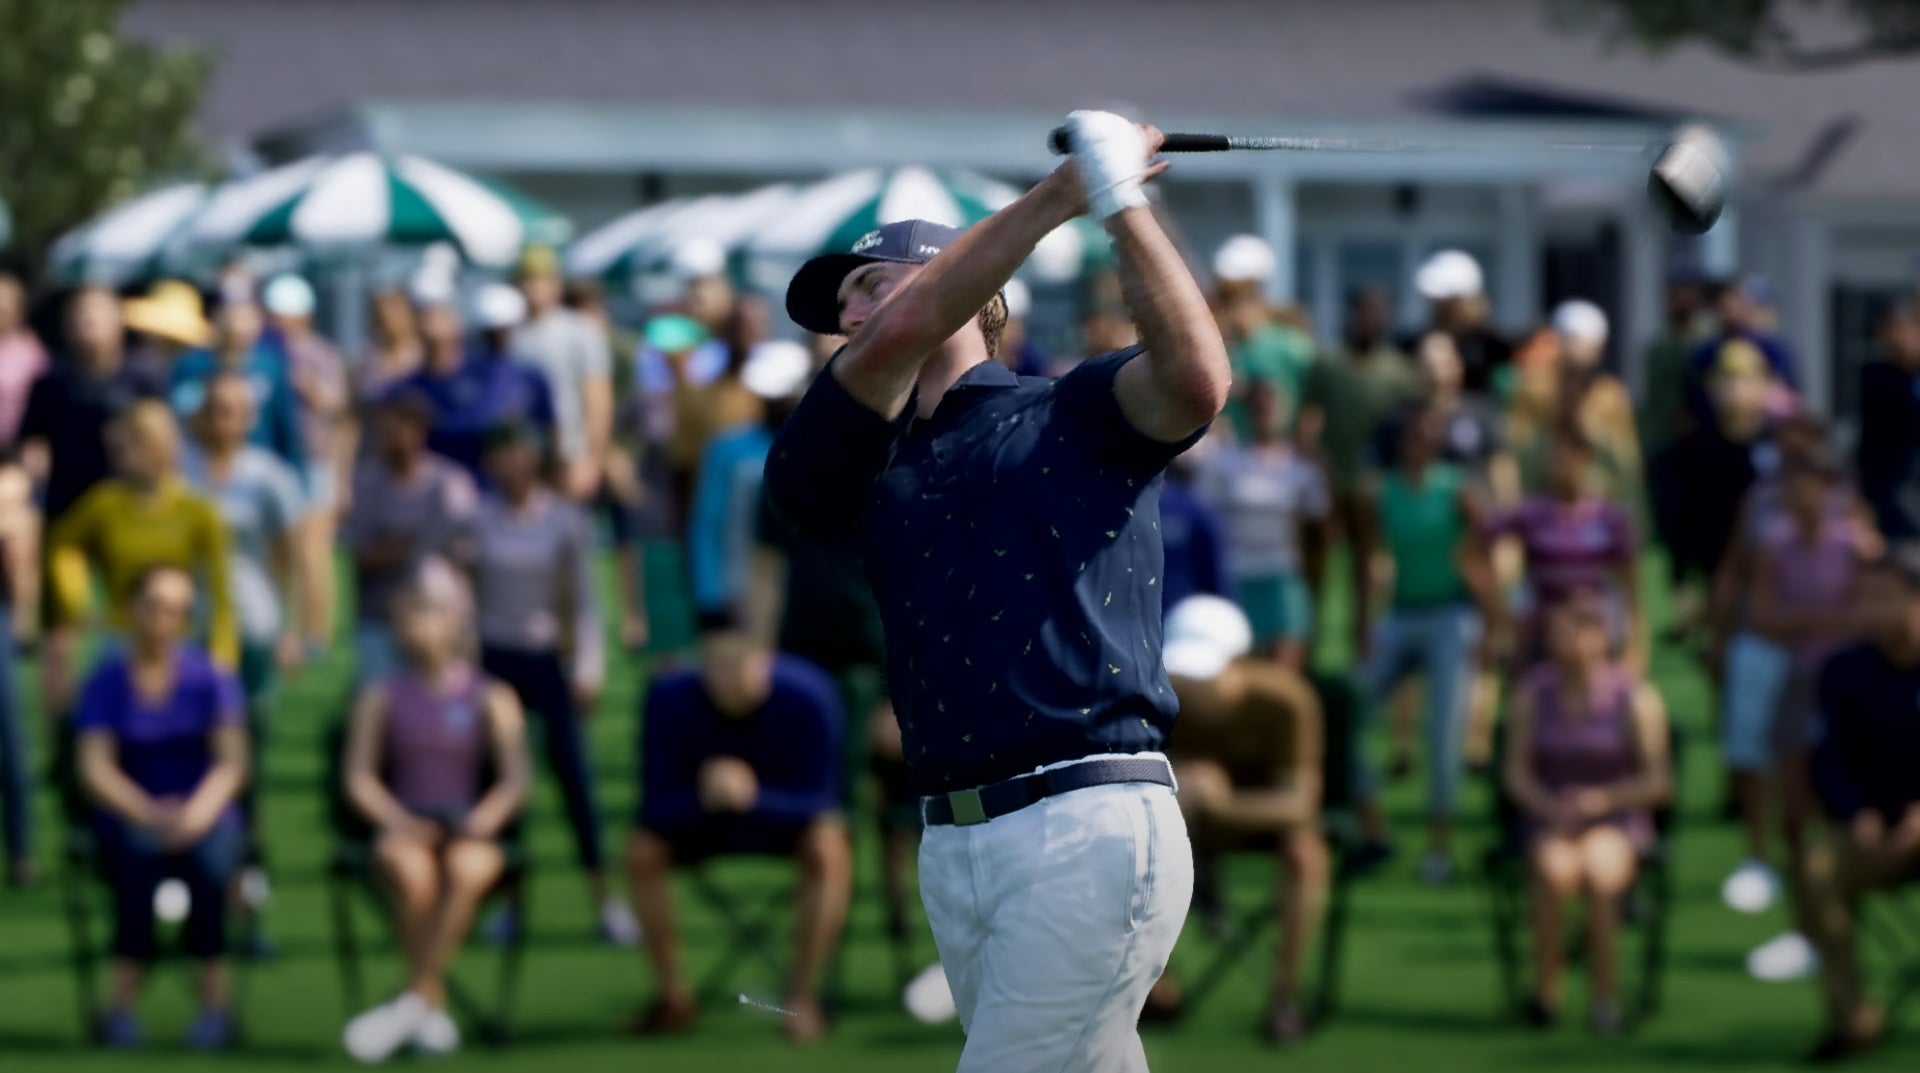 A golfer takes a big swing in next year's EA Sports PGA Tour. It looks a bit like the golfer is taking a bite of his own arm.